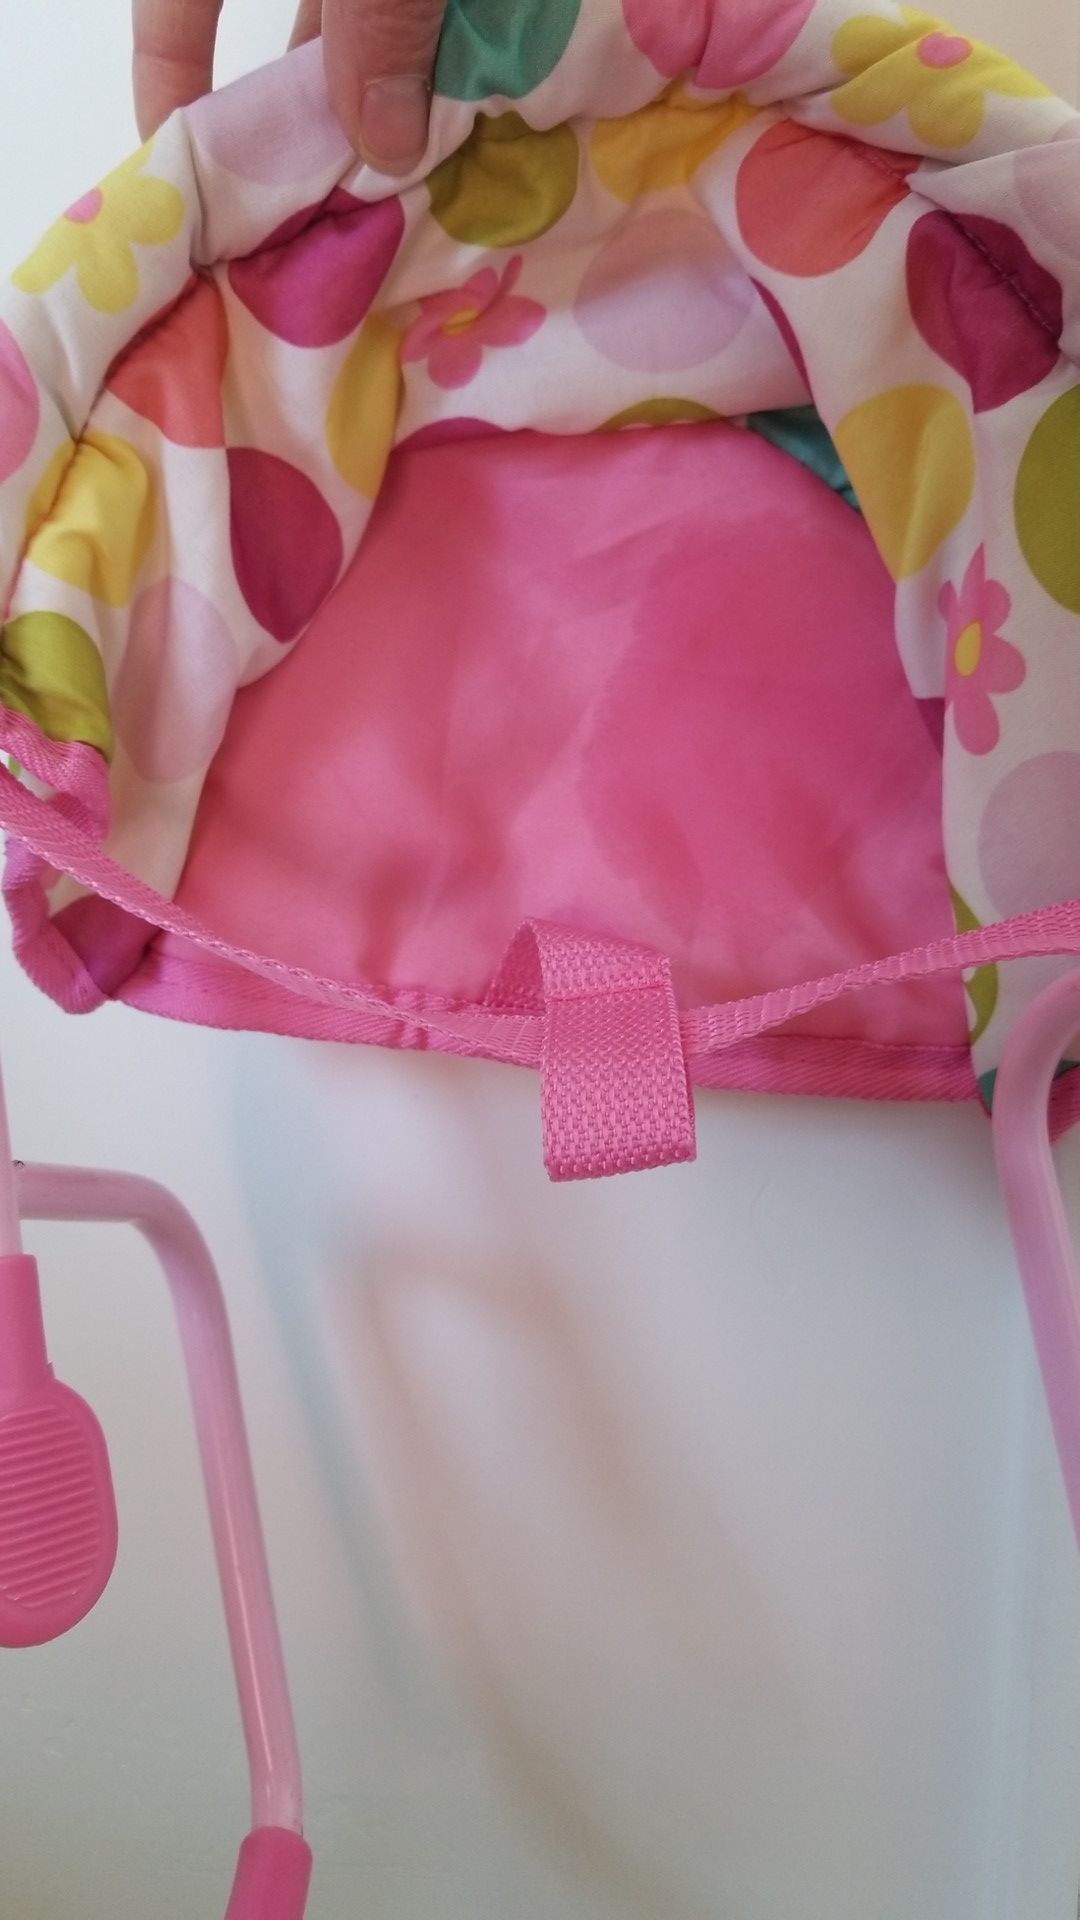 A baby doll high chair for a table